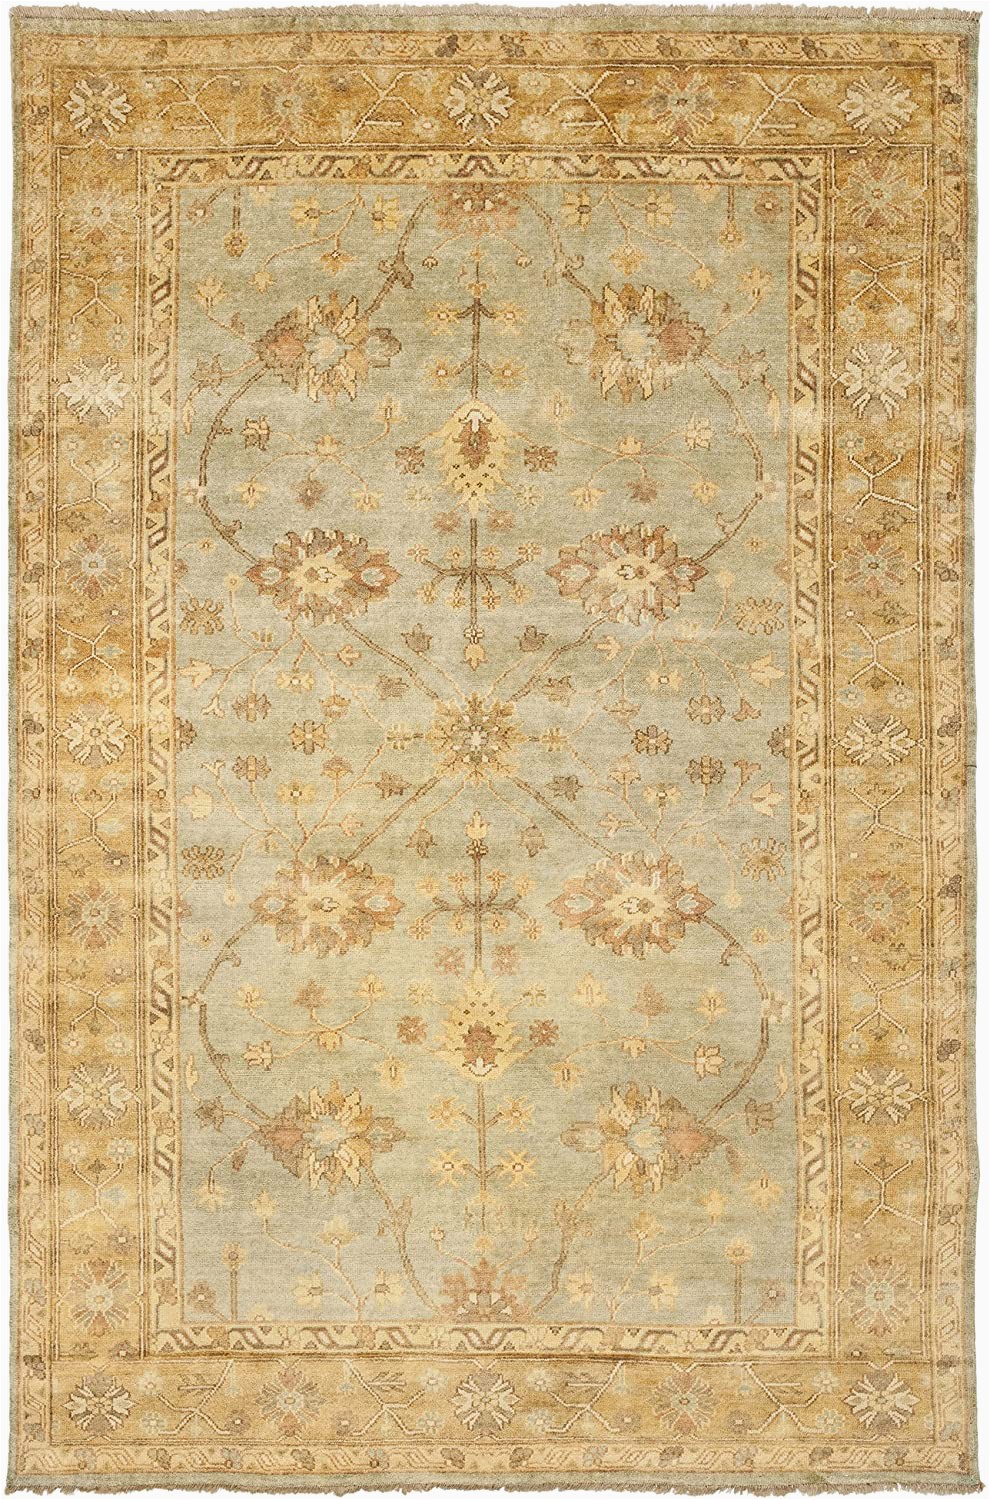 Light Blue and Gold area Rug Amazon Safavieh Oushak Collection Osh151a Hand Knotted